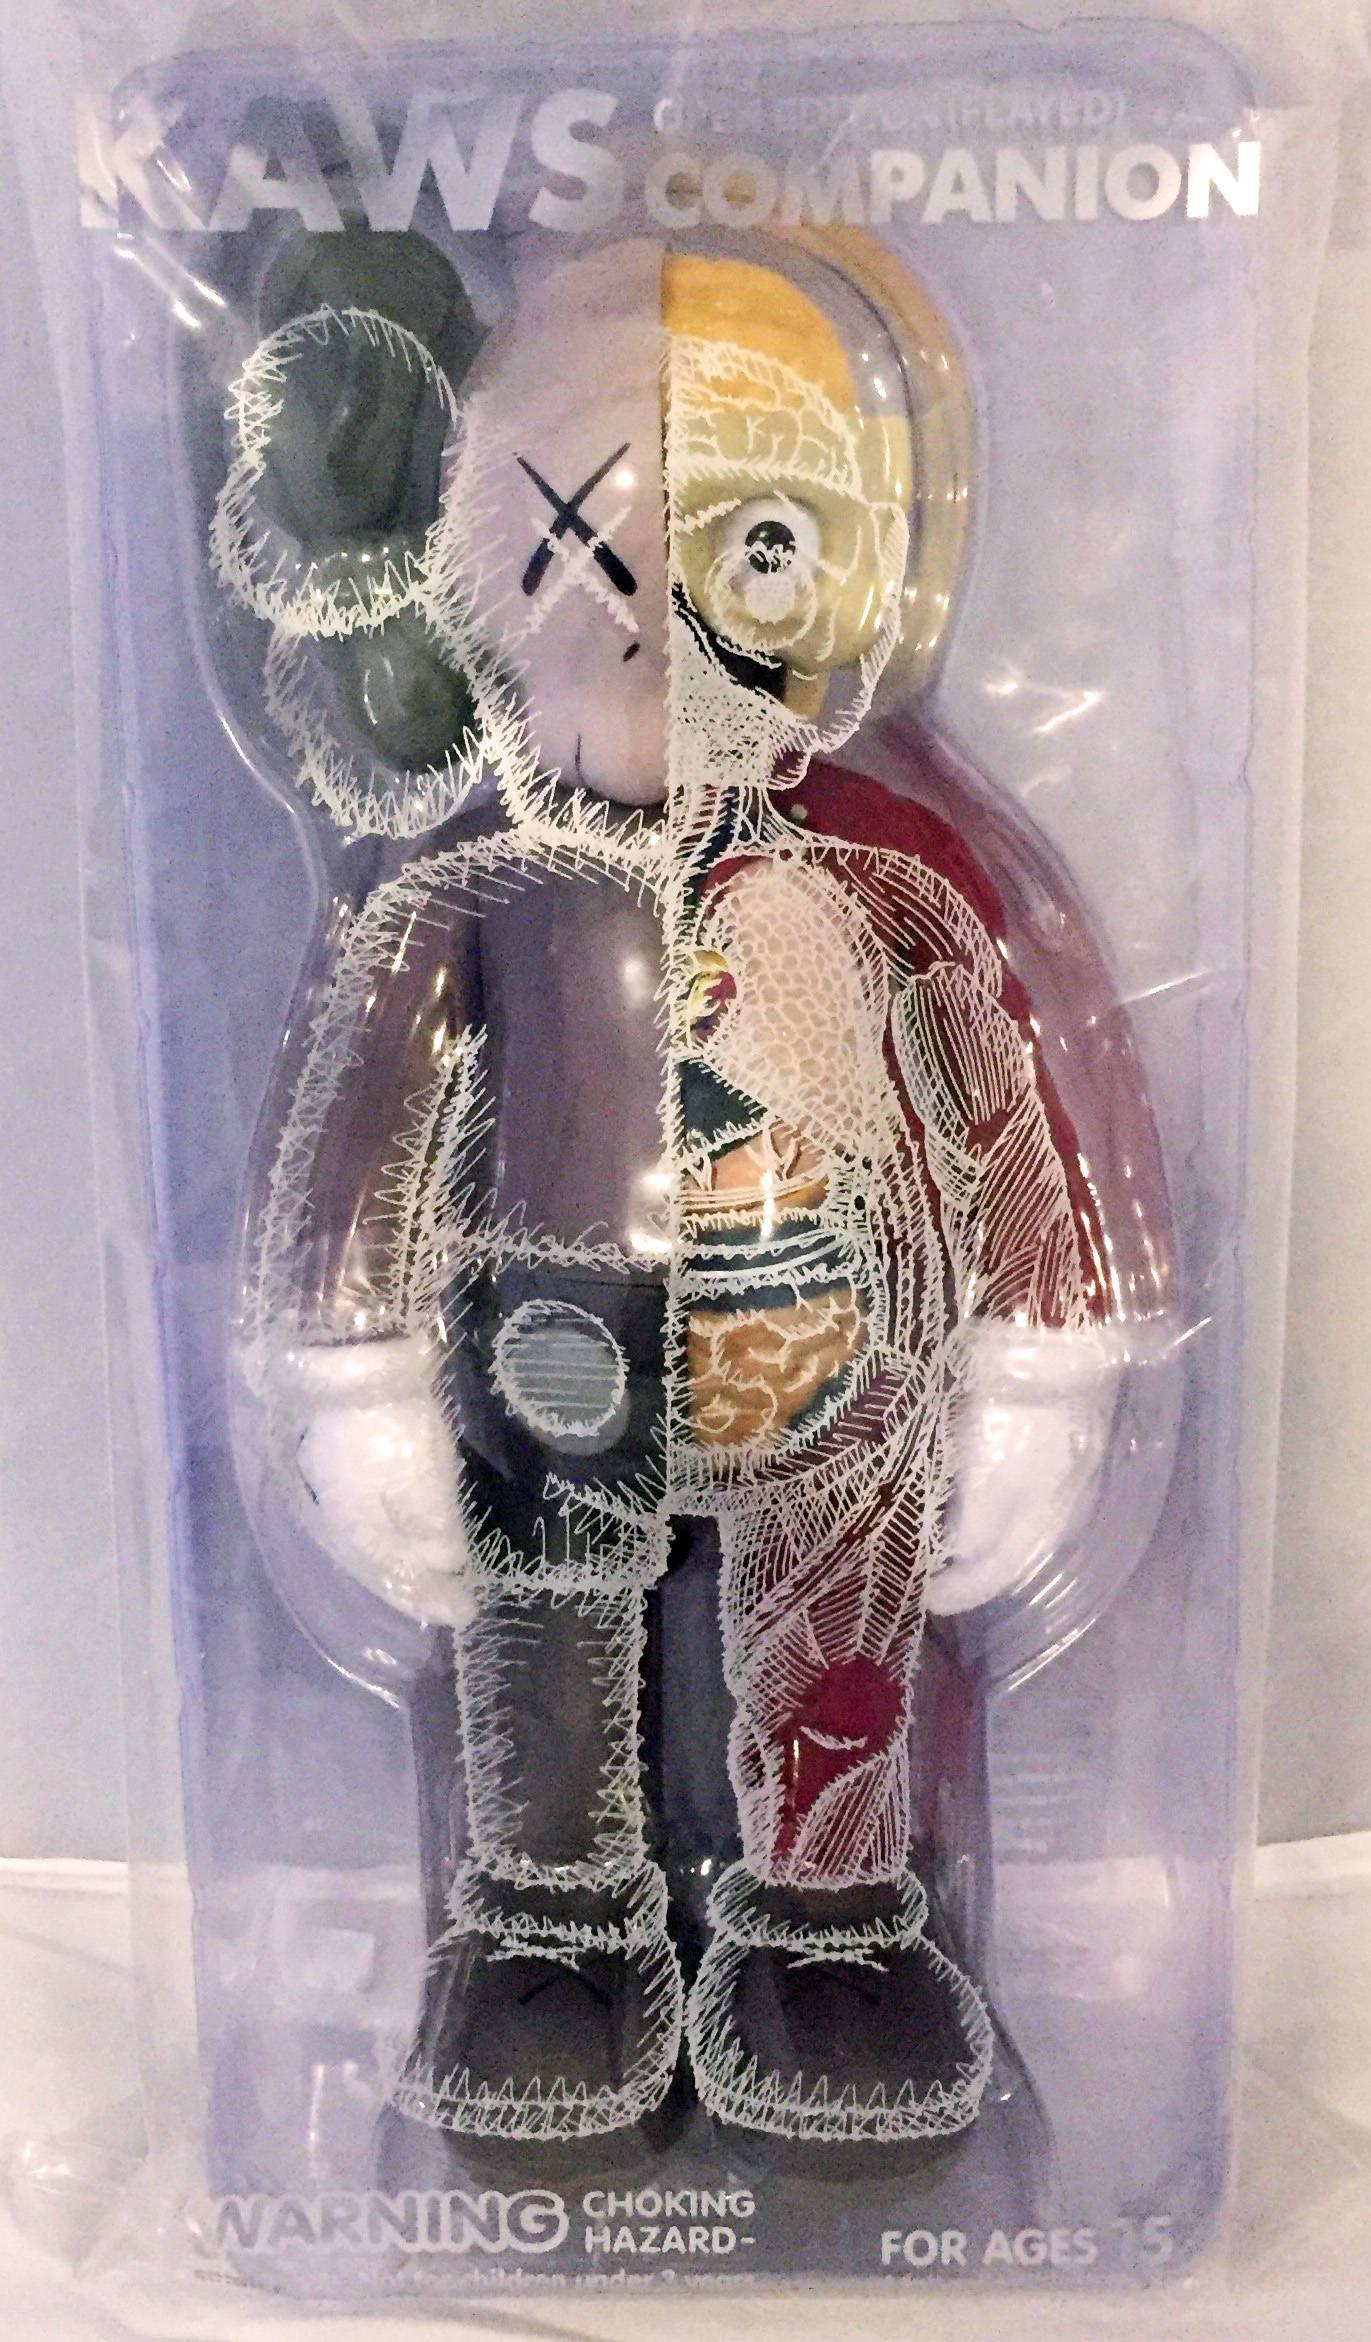 Kaws Companion Open Edition: Complete Set of 6. New and sealed in its original packaging. Published by Medicom Japan in conjunction with the exhibition, KAWS: Where The End Starts at the Modern Art Museum of Fort Worth. These figurines have since